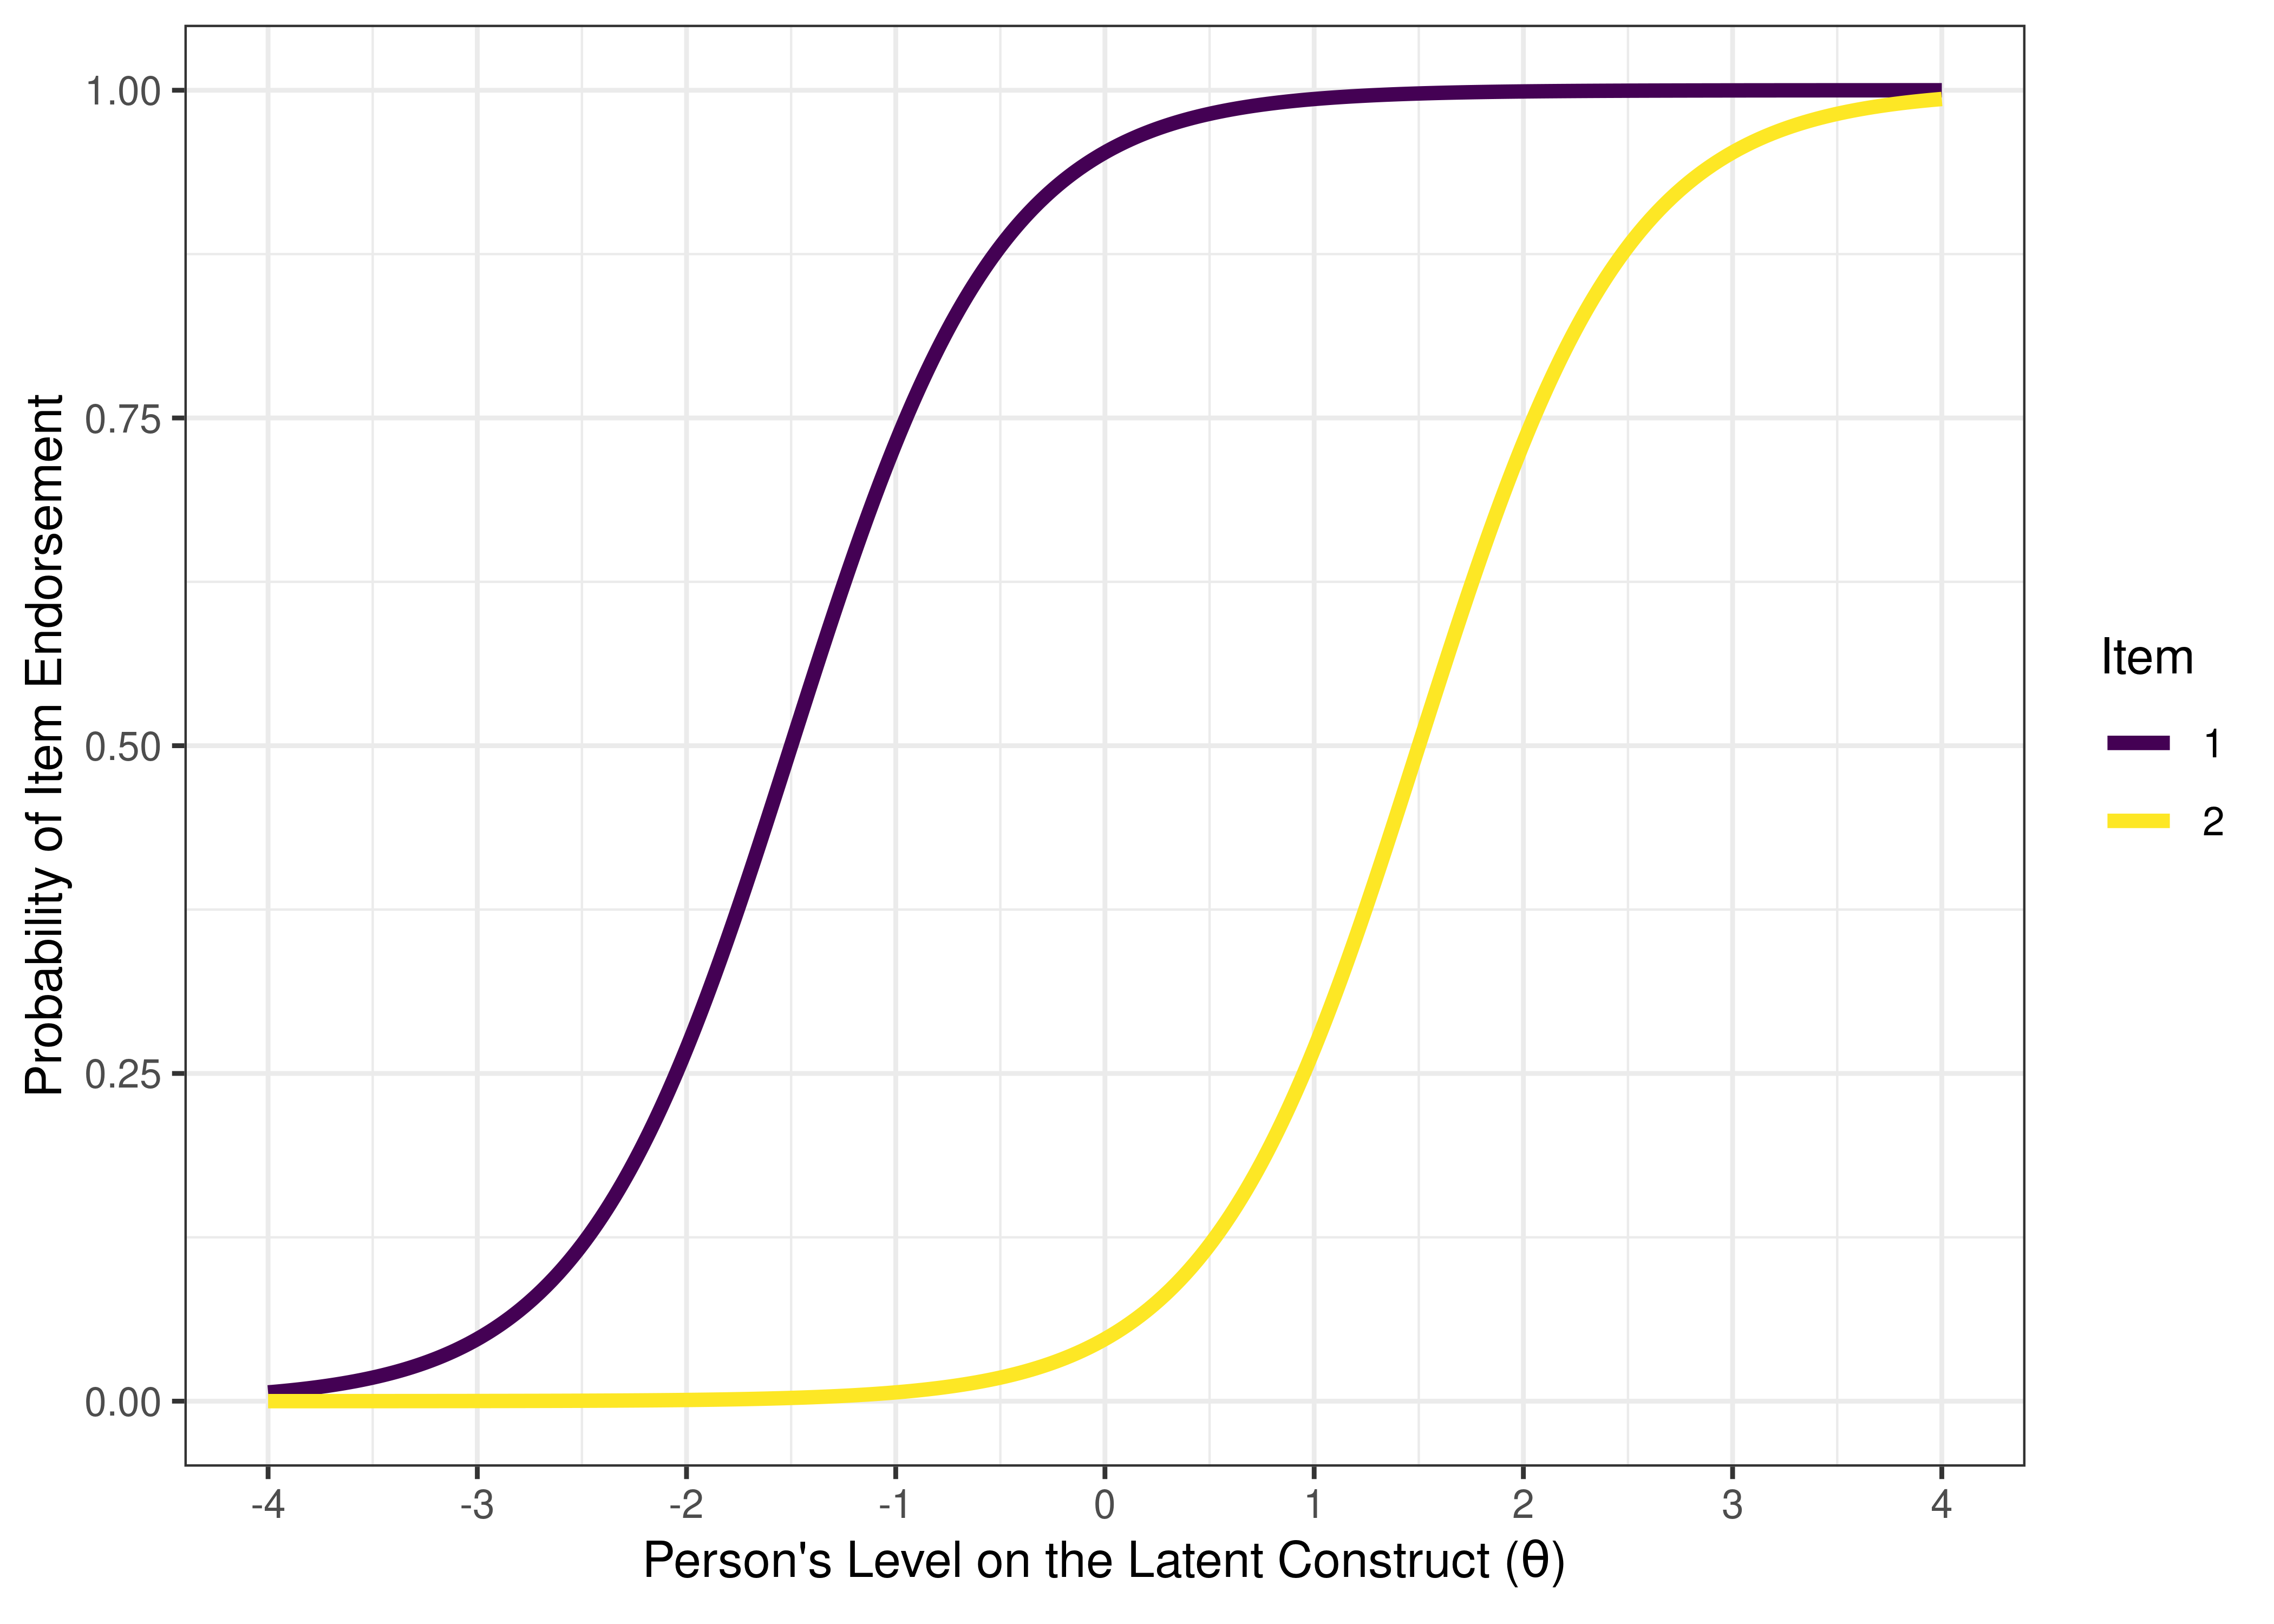 Visual Representation of an Efficient Assessment Based on Item Characteristic Curves from Two-Parameter Logistic Model in Item Response Theory.